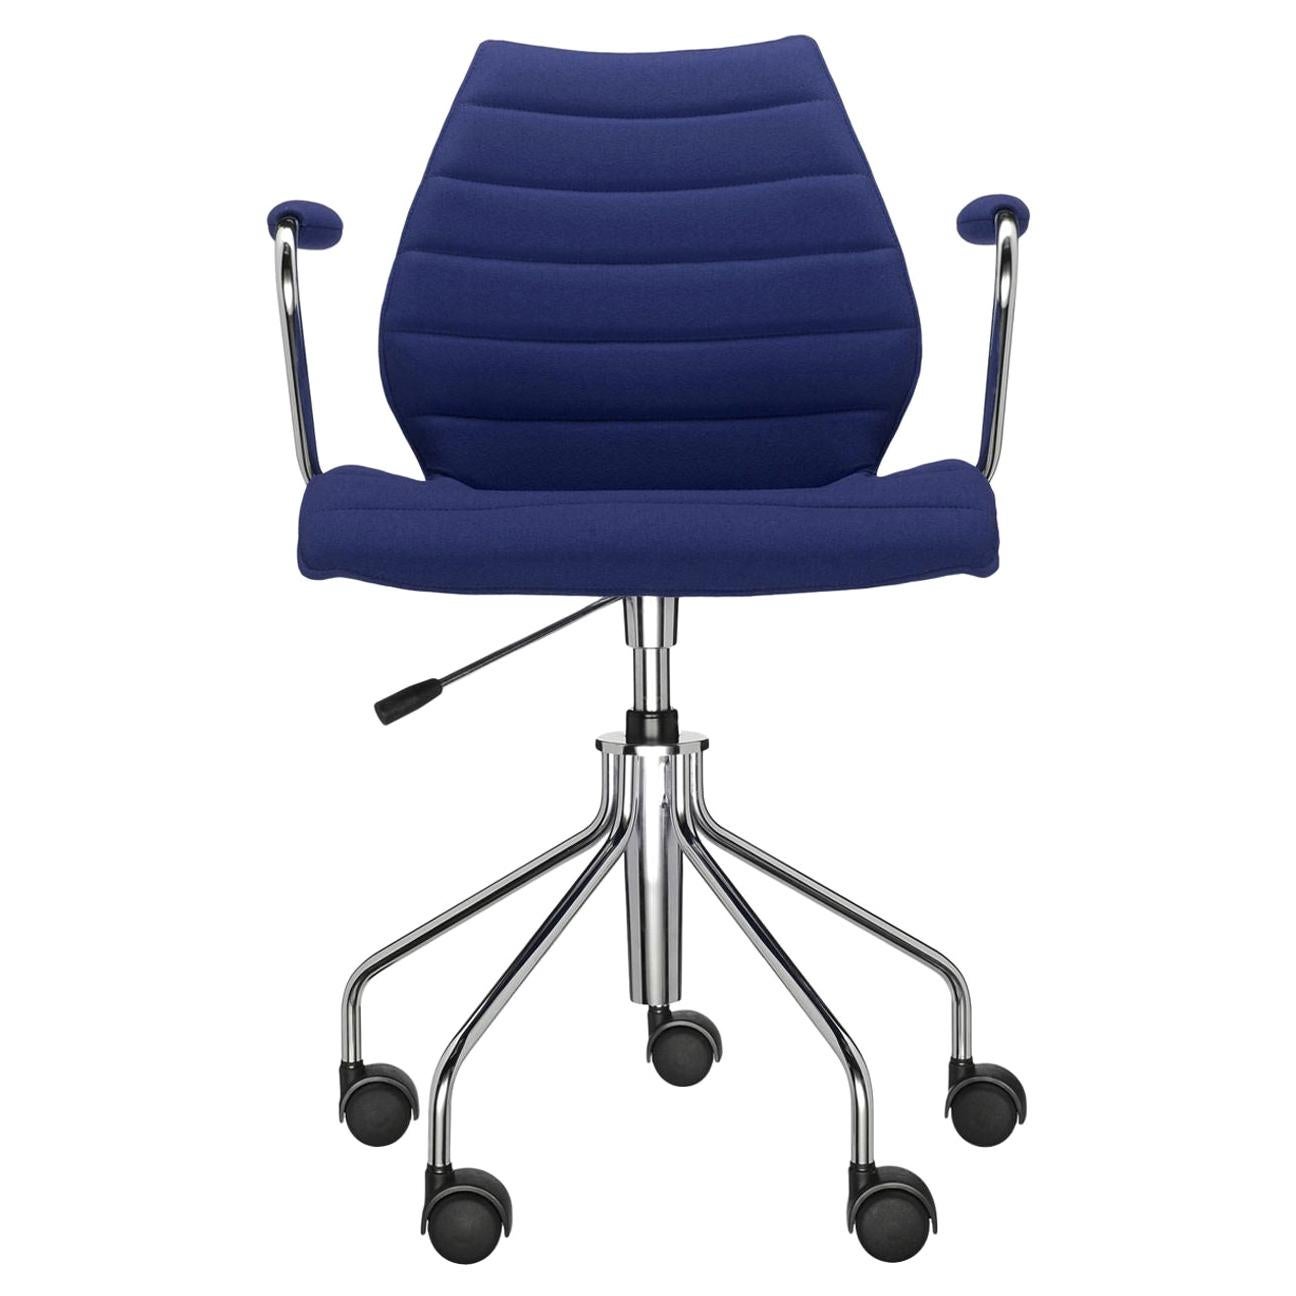 Kartell Maui Soft Trevira Armchair in Blue by Vico Magistretti